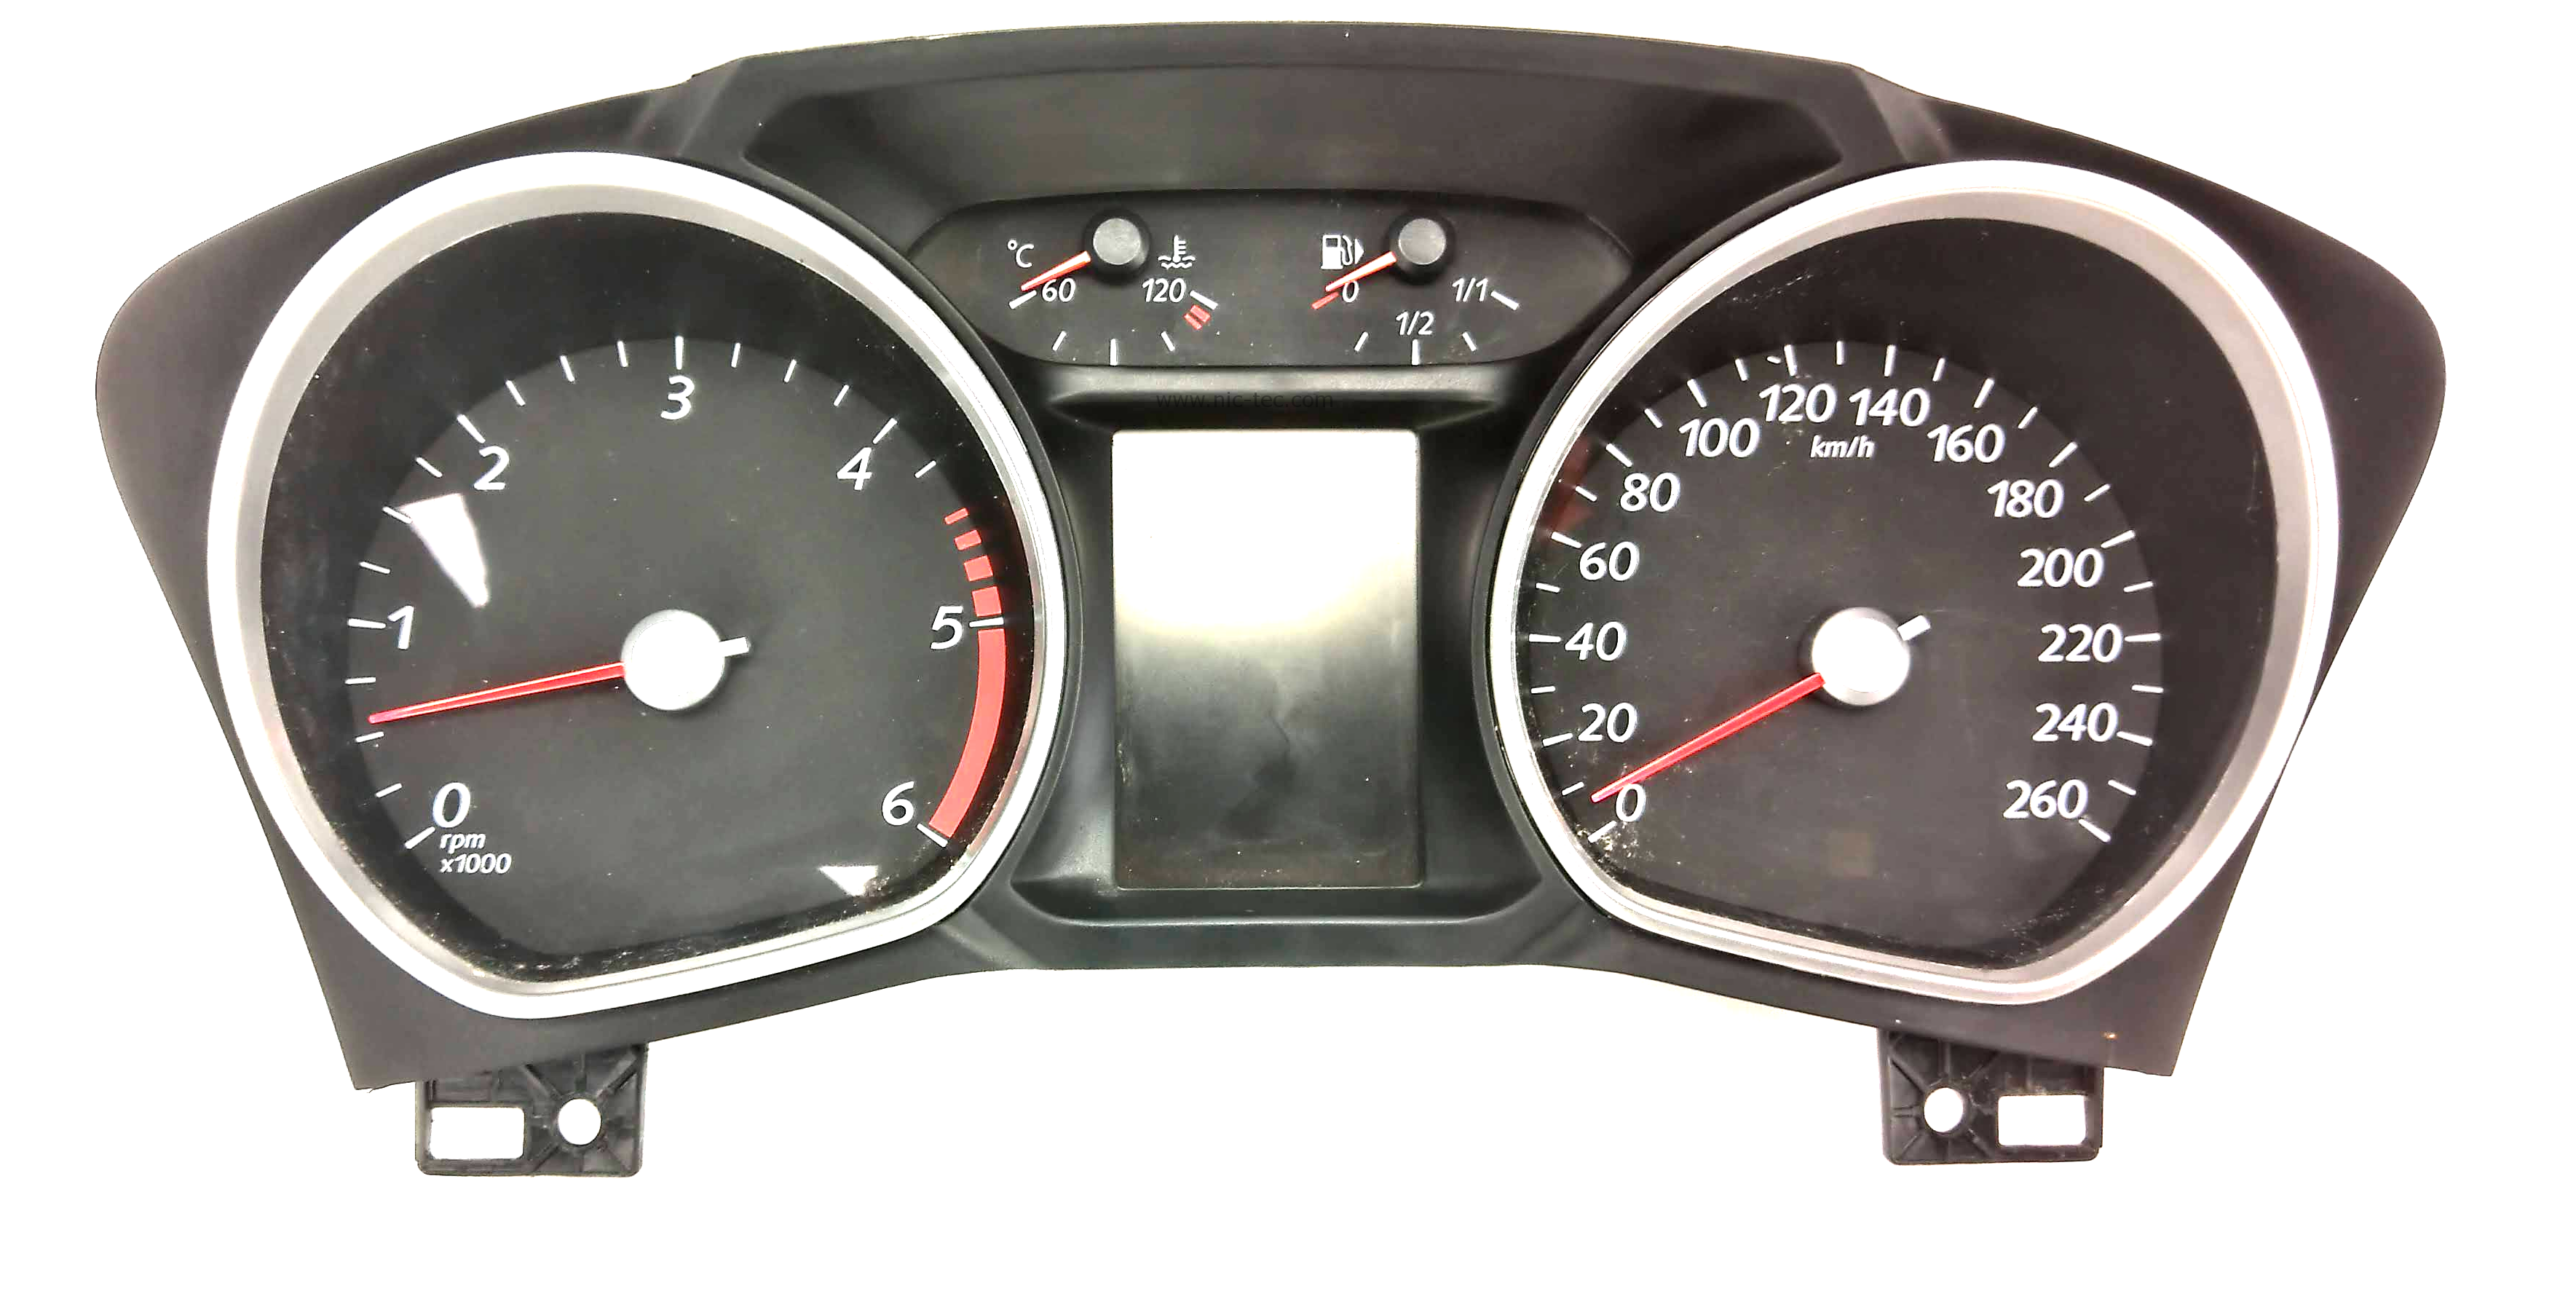 afbalanceret At understrege Kæreste Ford c-max / s-max / focus / Kuga / Galaxy / Mondeo Ny model speedometer rep